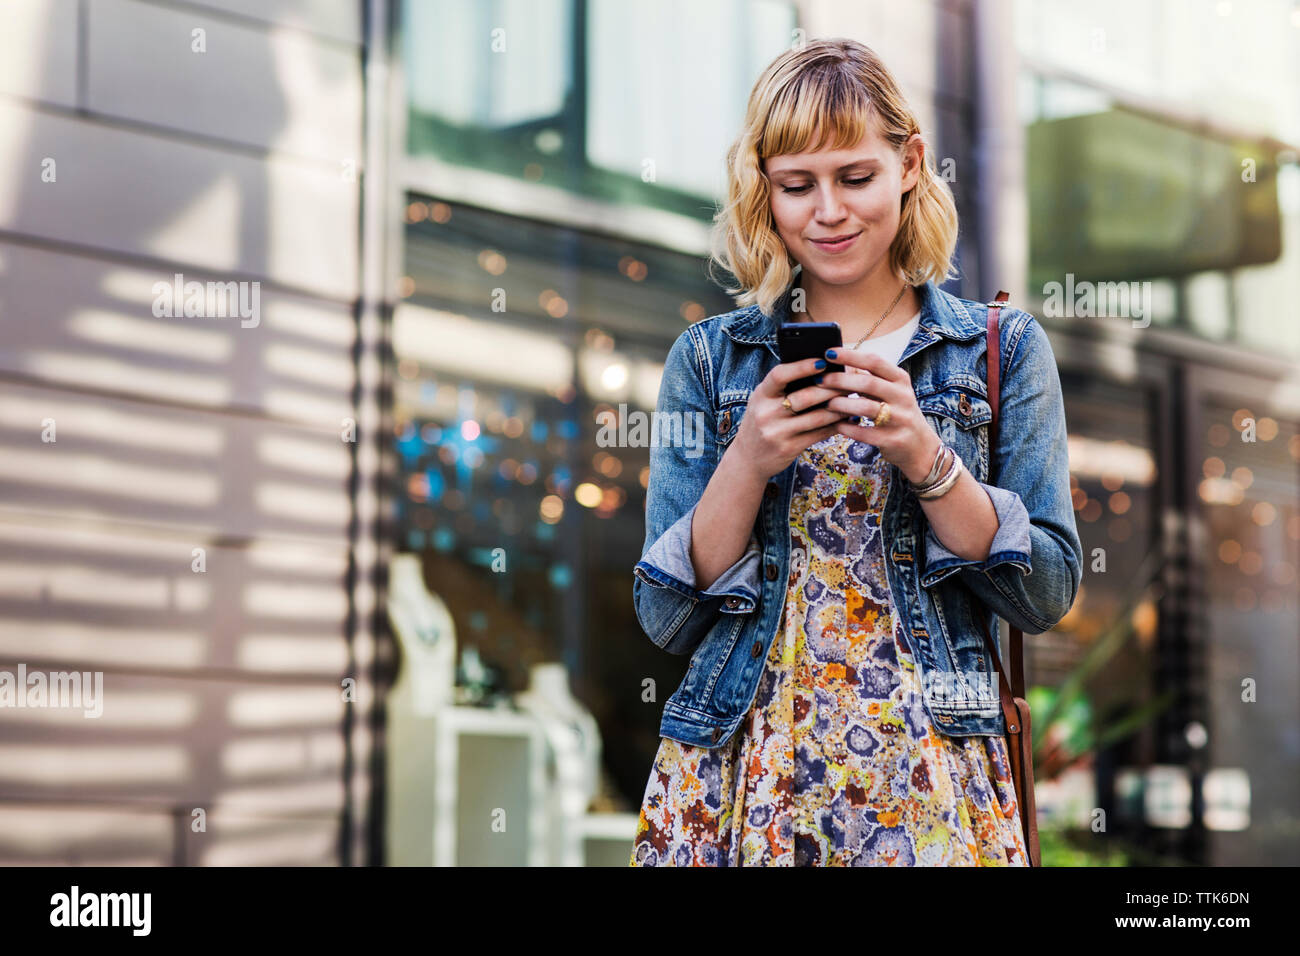 Woman using smart phone while standing Stock Photo